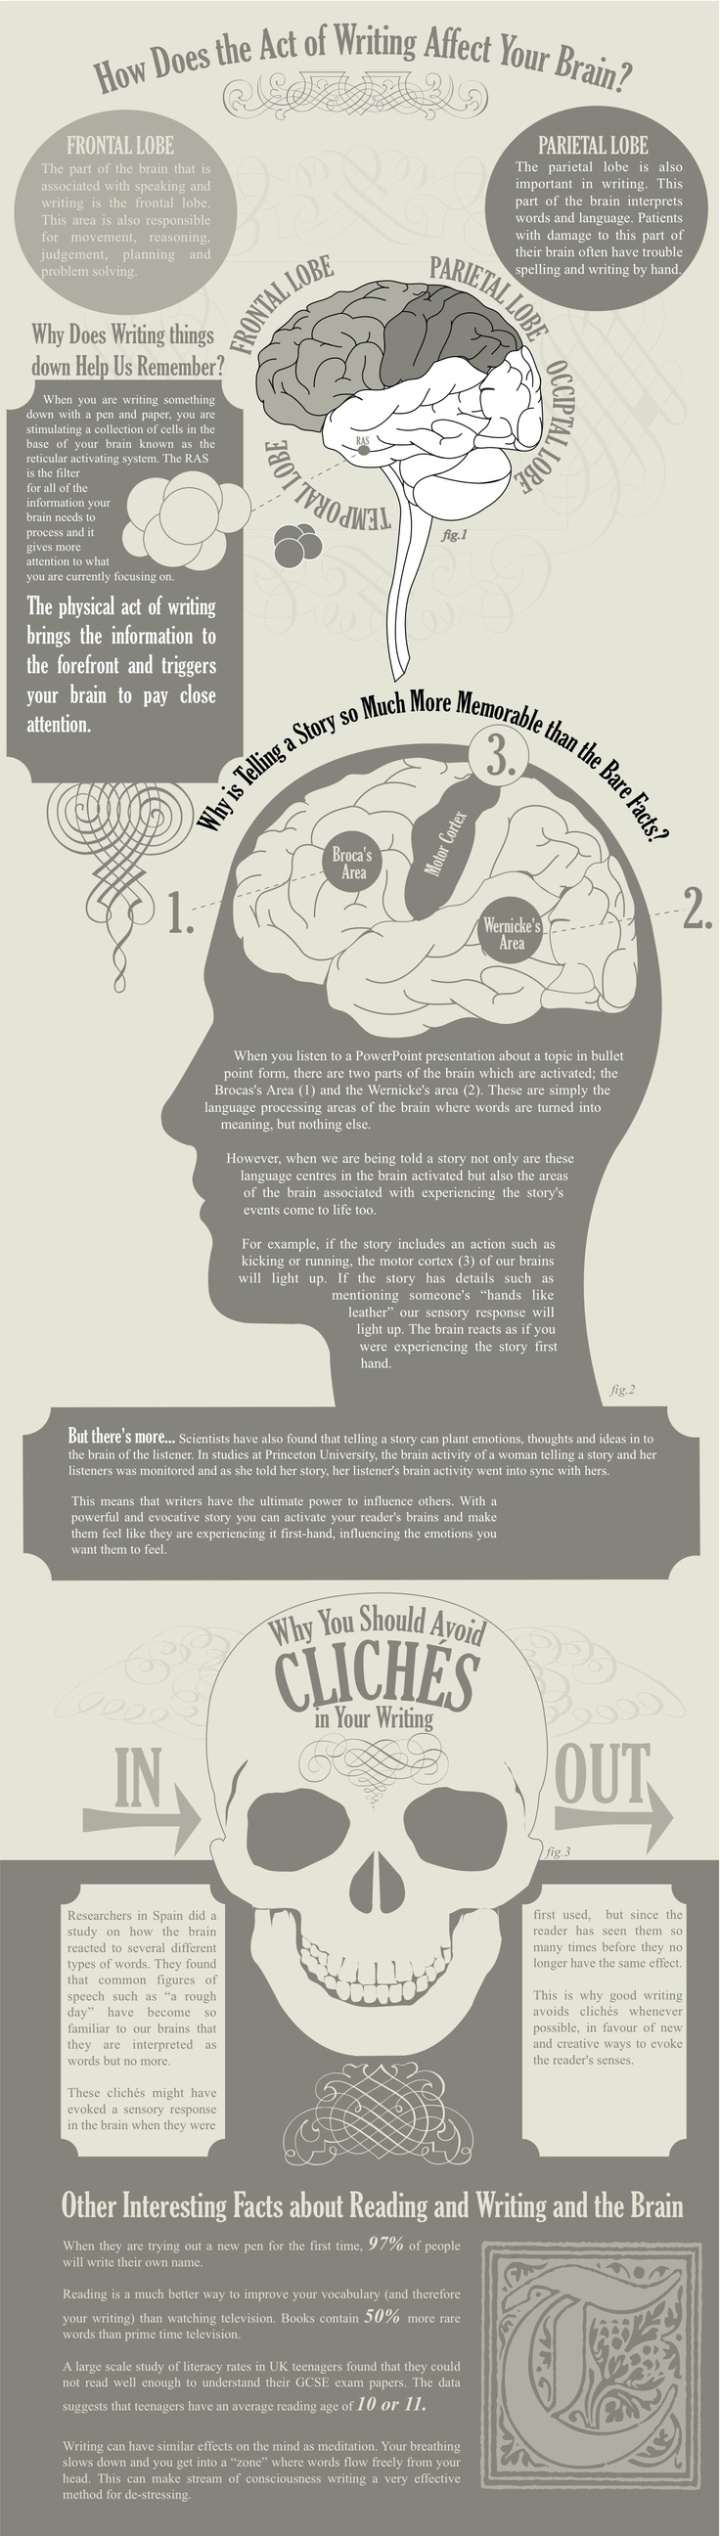 Reading, Writing, and the Brain